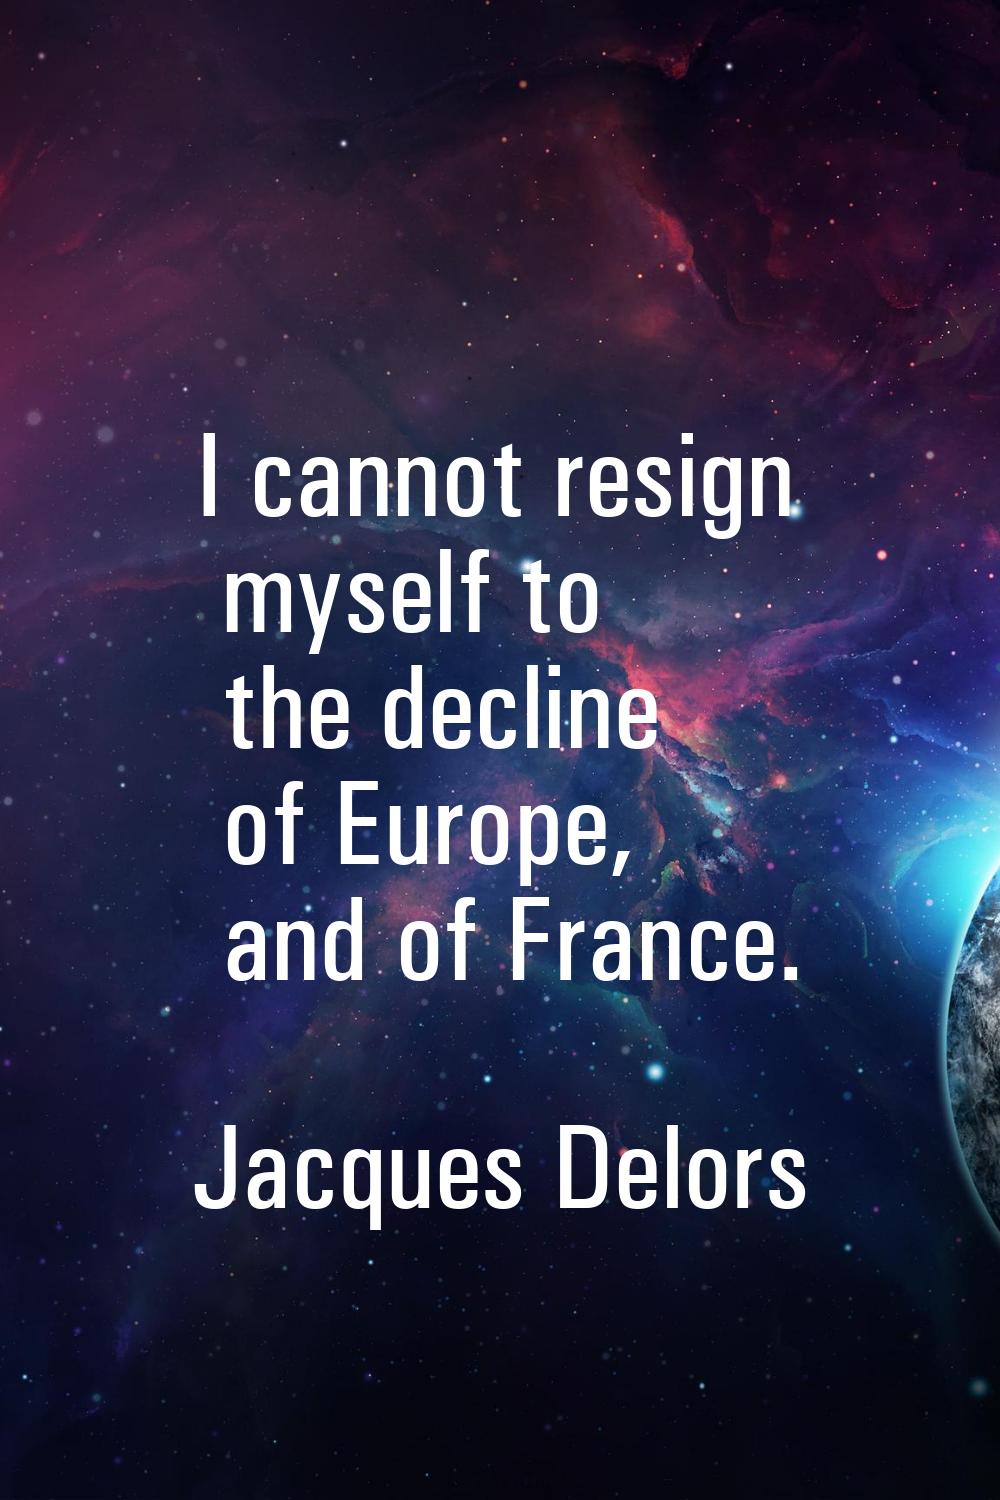 I cannot resign myself to the decline of Europe, and of France.